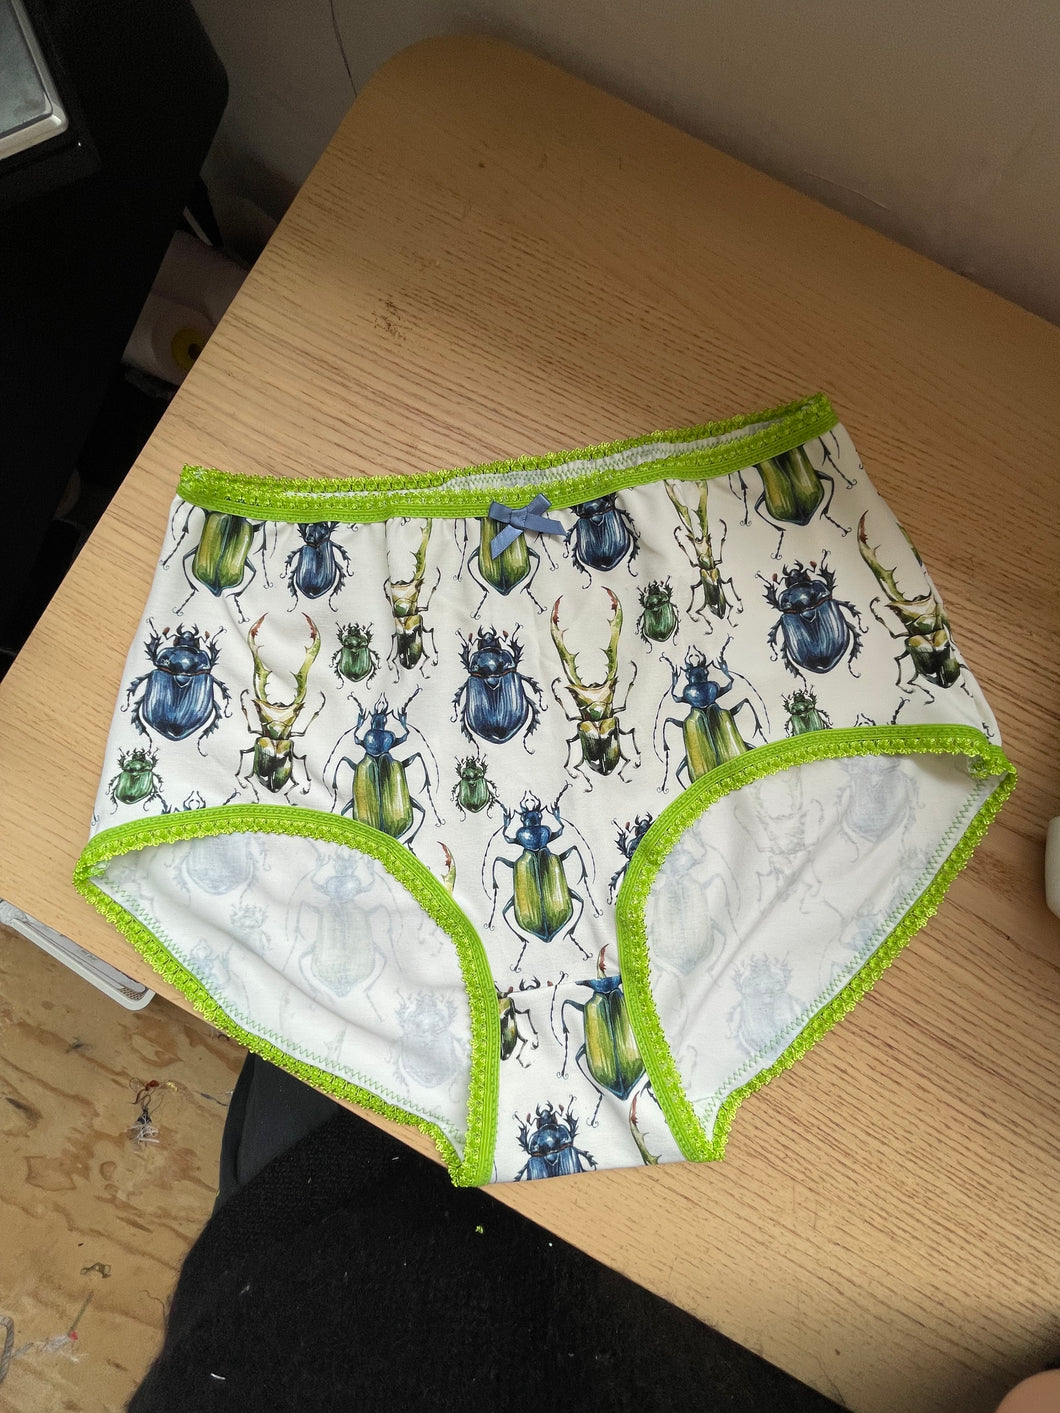 The Bug Girl Knickers